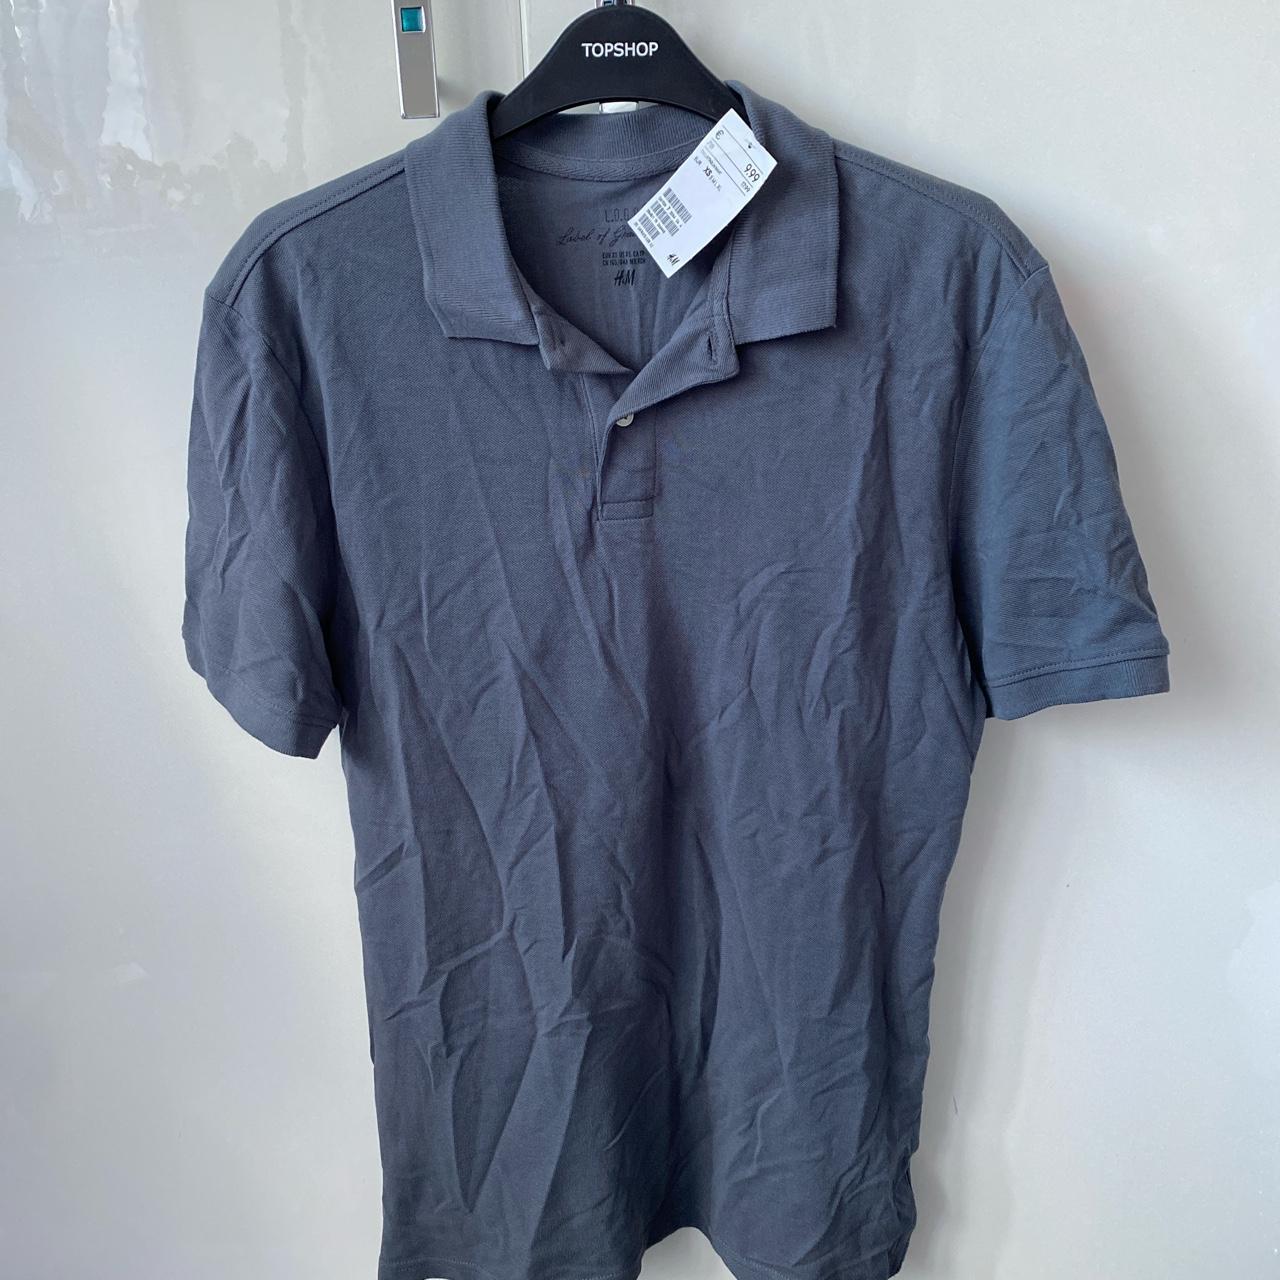 Polo top from H&M. Never worn new with tags. Size XS - Depop